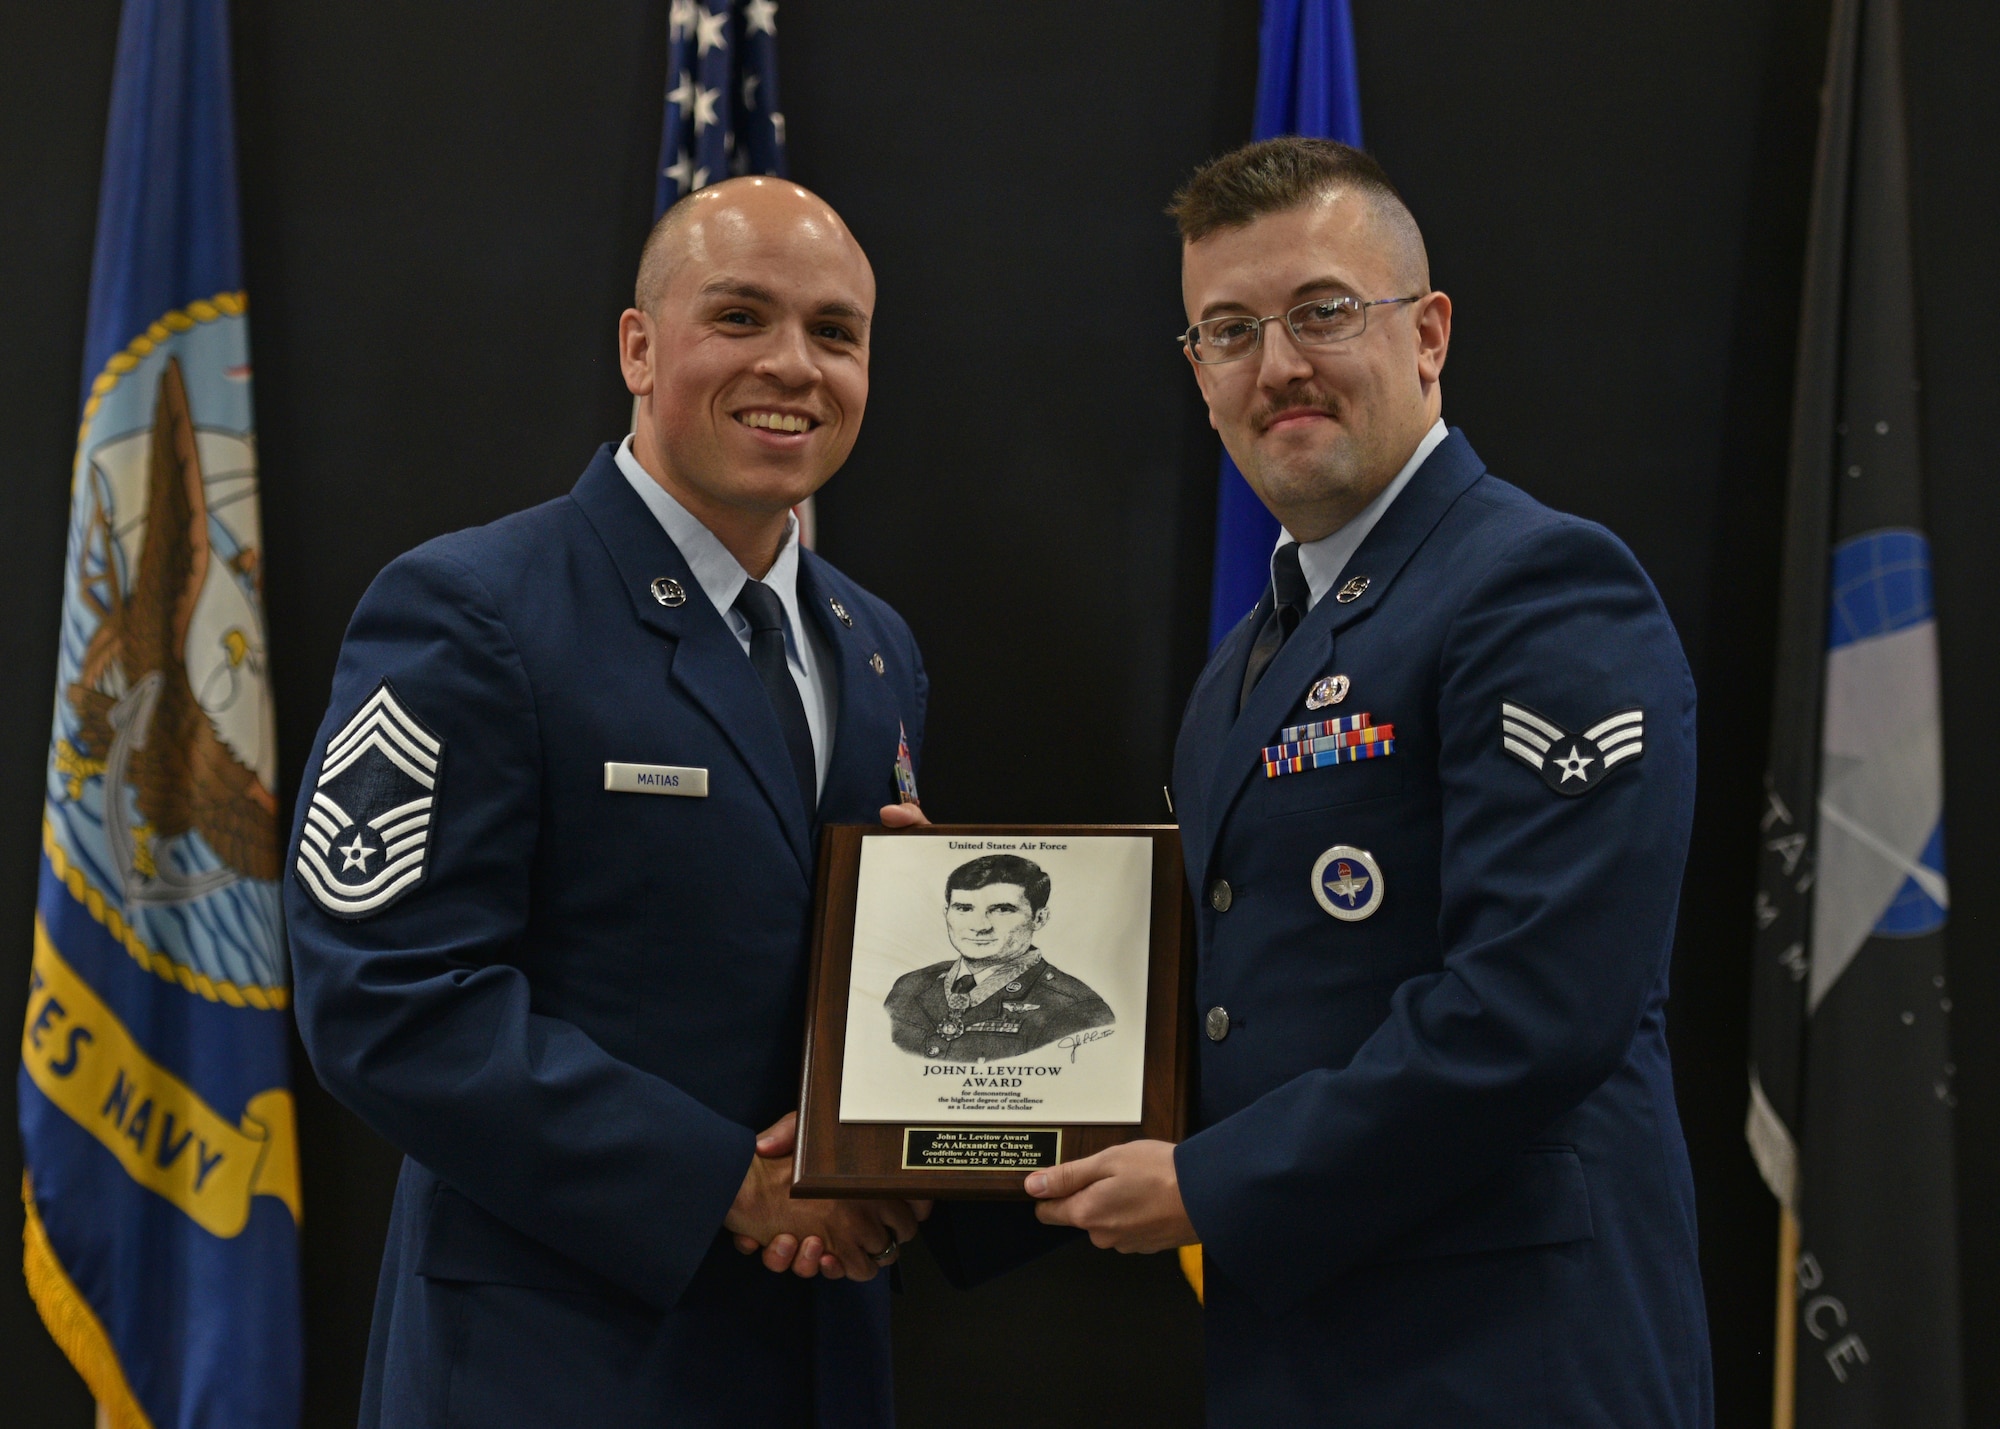 U.S. Air Force Chief Master Sgt. Joshua Matias, 47th Operations Support Squadron senior enlisted leader, presents Senior Airman Alexandre Chaves, 315th Training Squadron instructor, with the John L. Levitow award during the Airman Leadership School graduation at the Powell Event Center, Goodfellow Air Force Base, Texas, July 7, 2022. The John L. Levitow award recognizes one student and is based upon all performance tasks, peer stratifications, and the capstone exercise. (U.S. Air Force photo by Senior Airman Ashley Thrash)